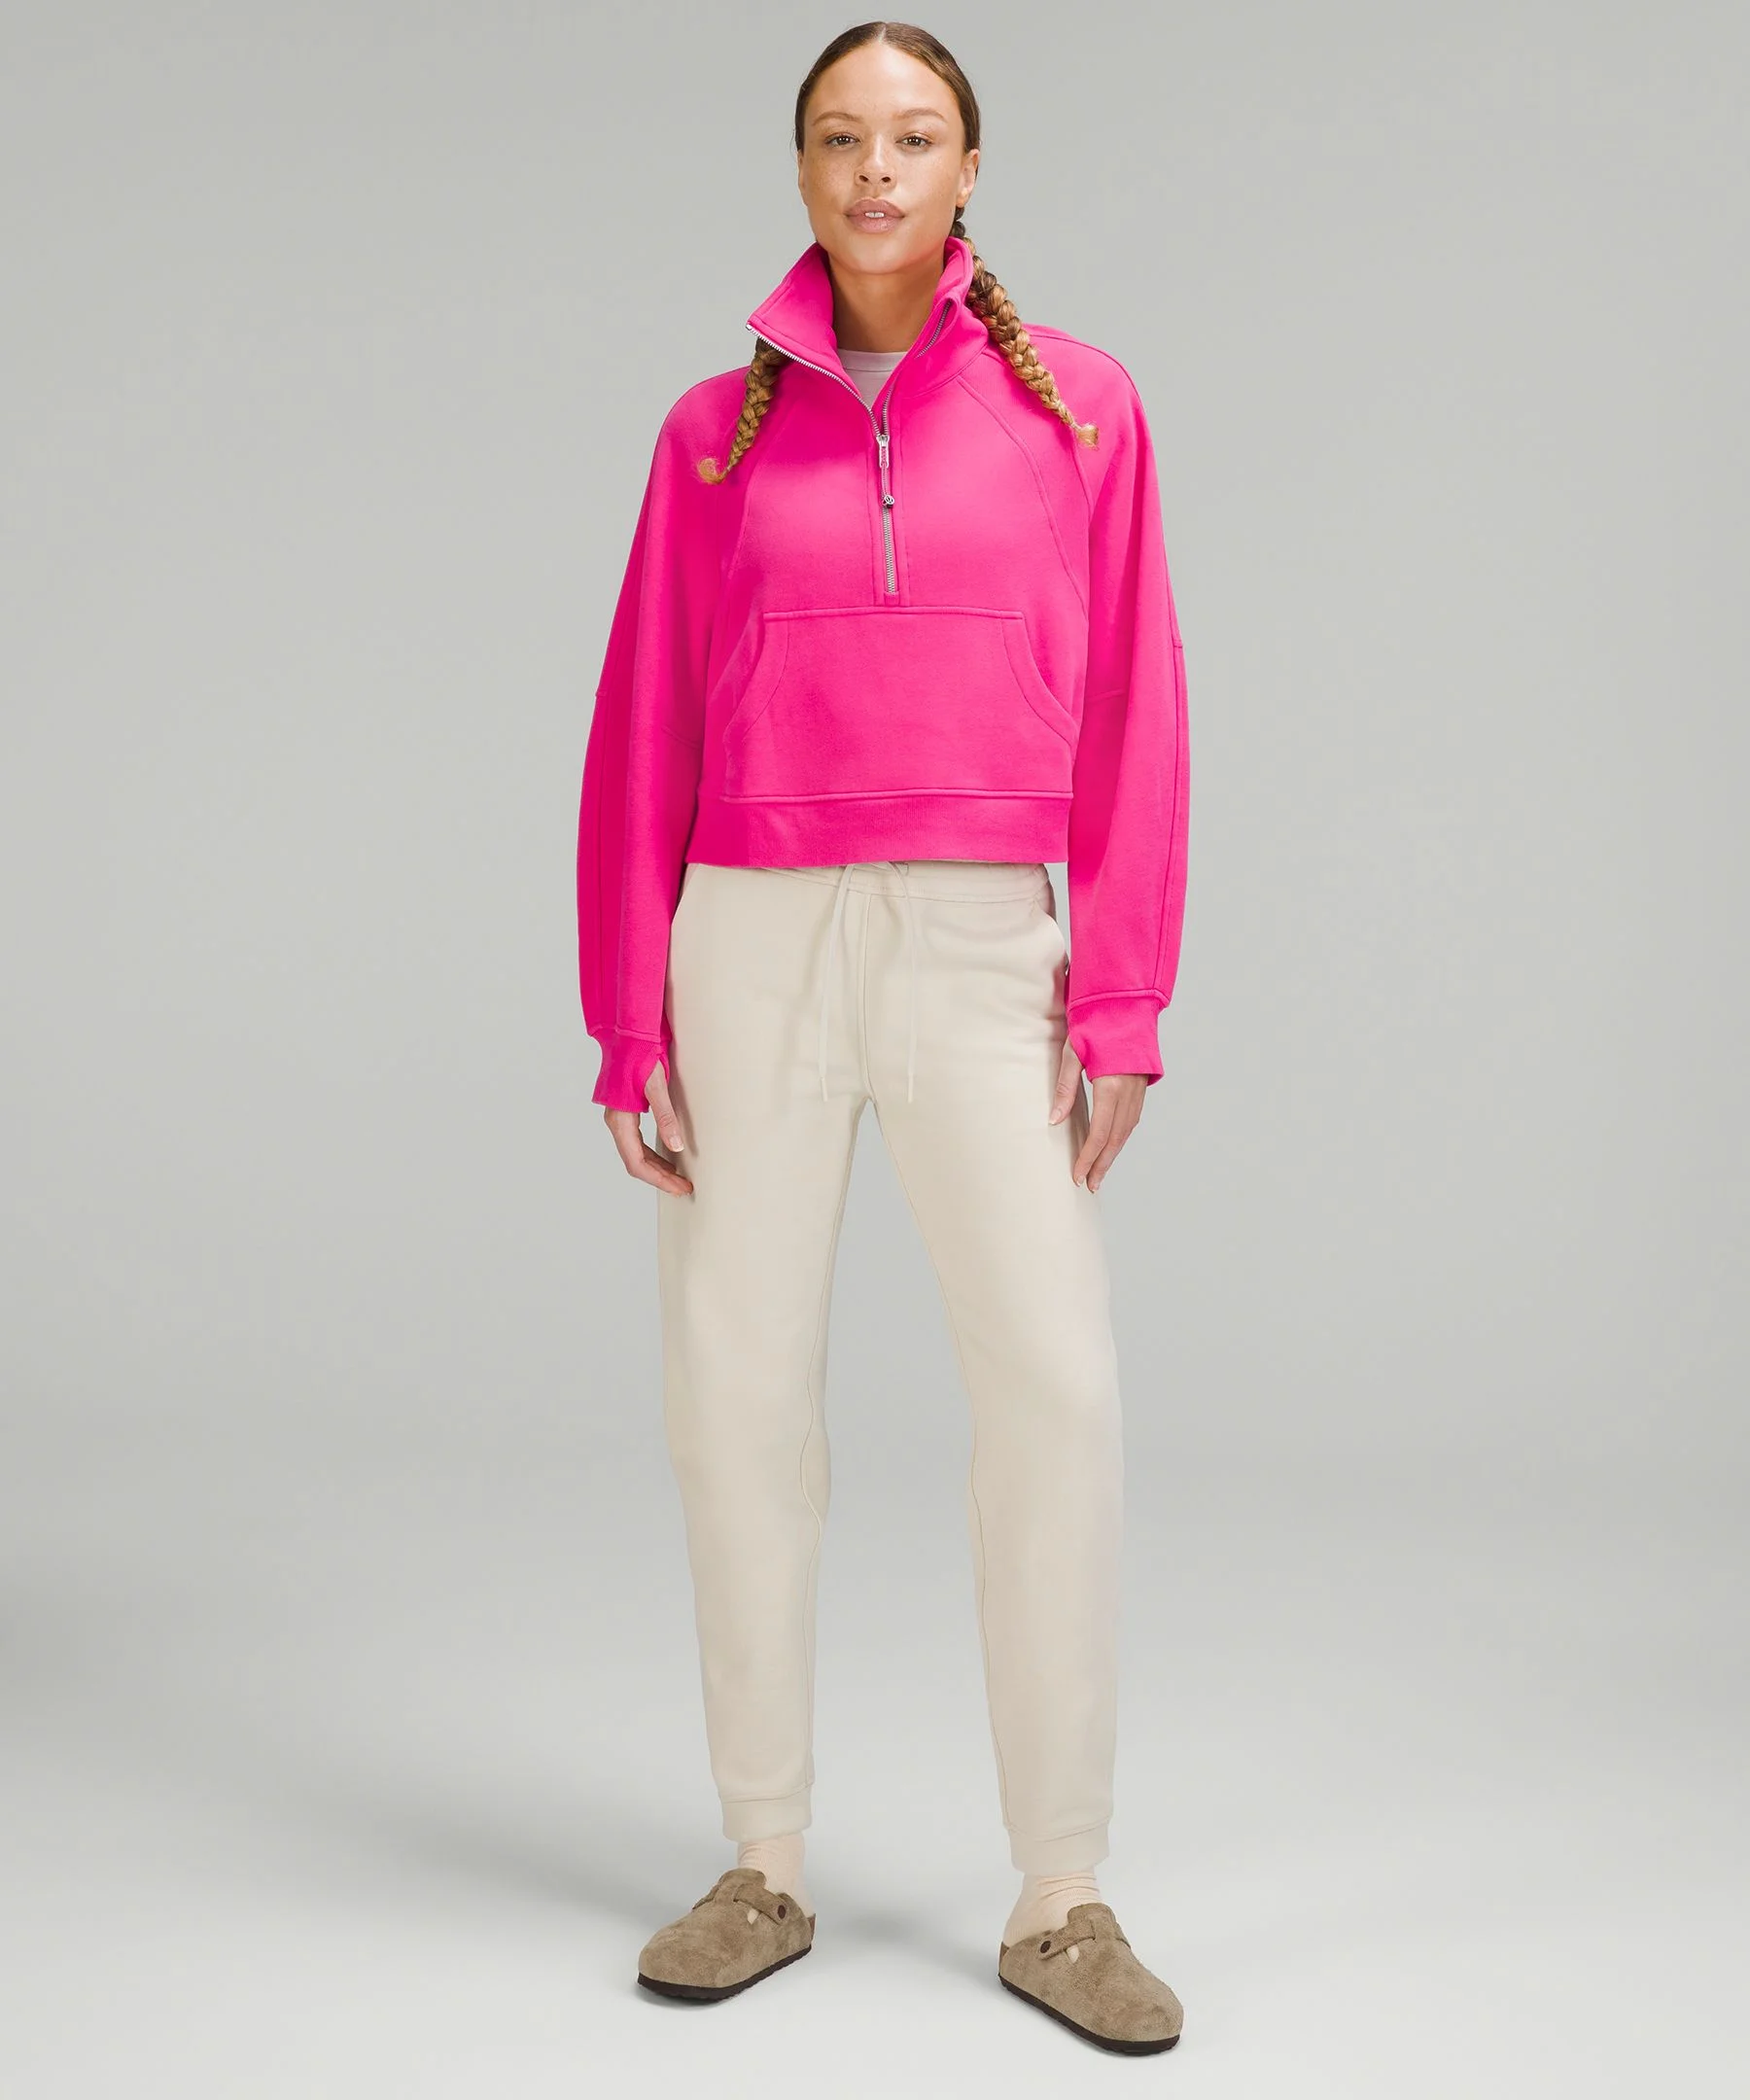 image trick finds] Scuba Oversized Half-Zip Funnel Neck in Powder Blue,  Pink Peony, Roasted Brown, and Psychic : r/lululemon